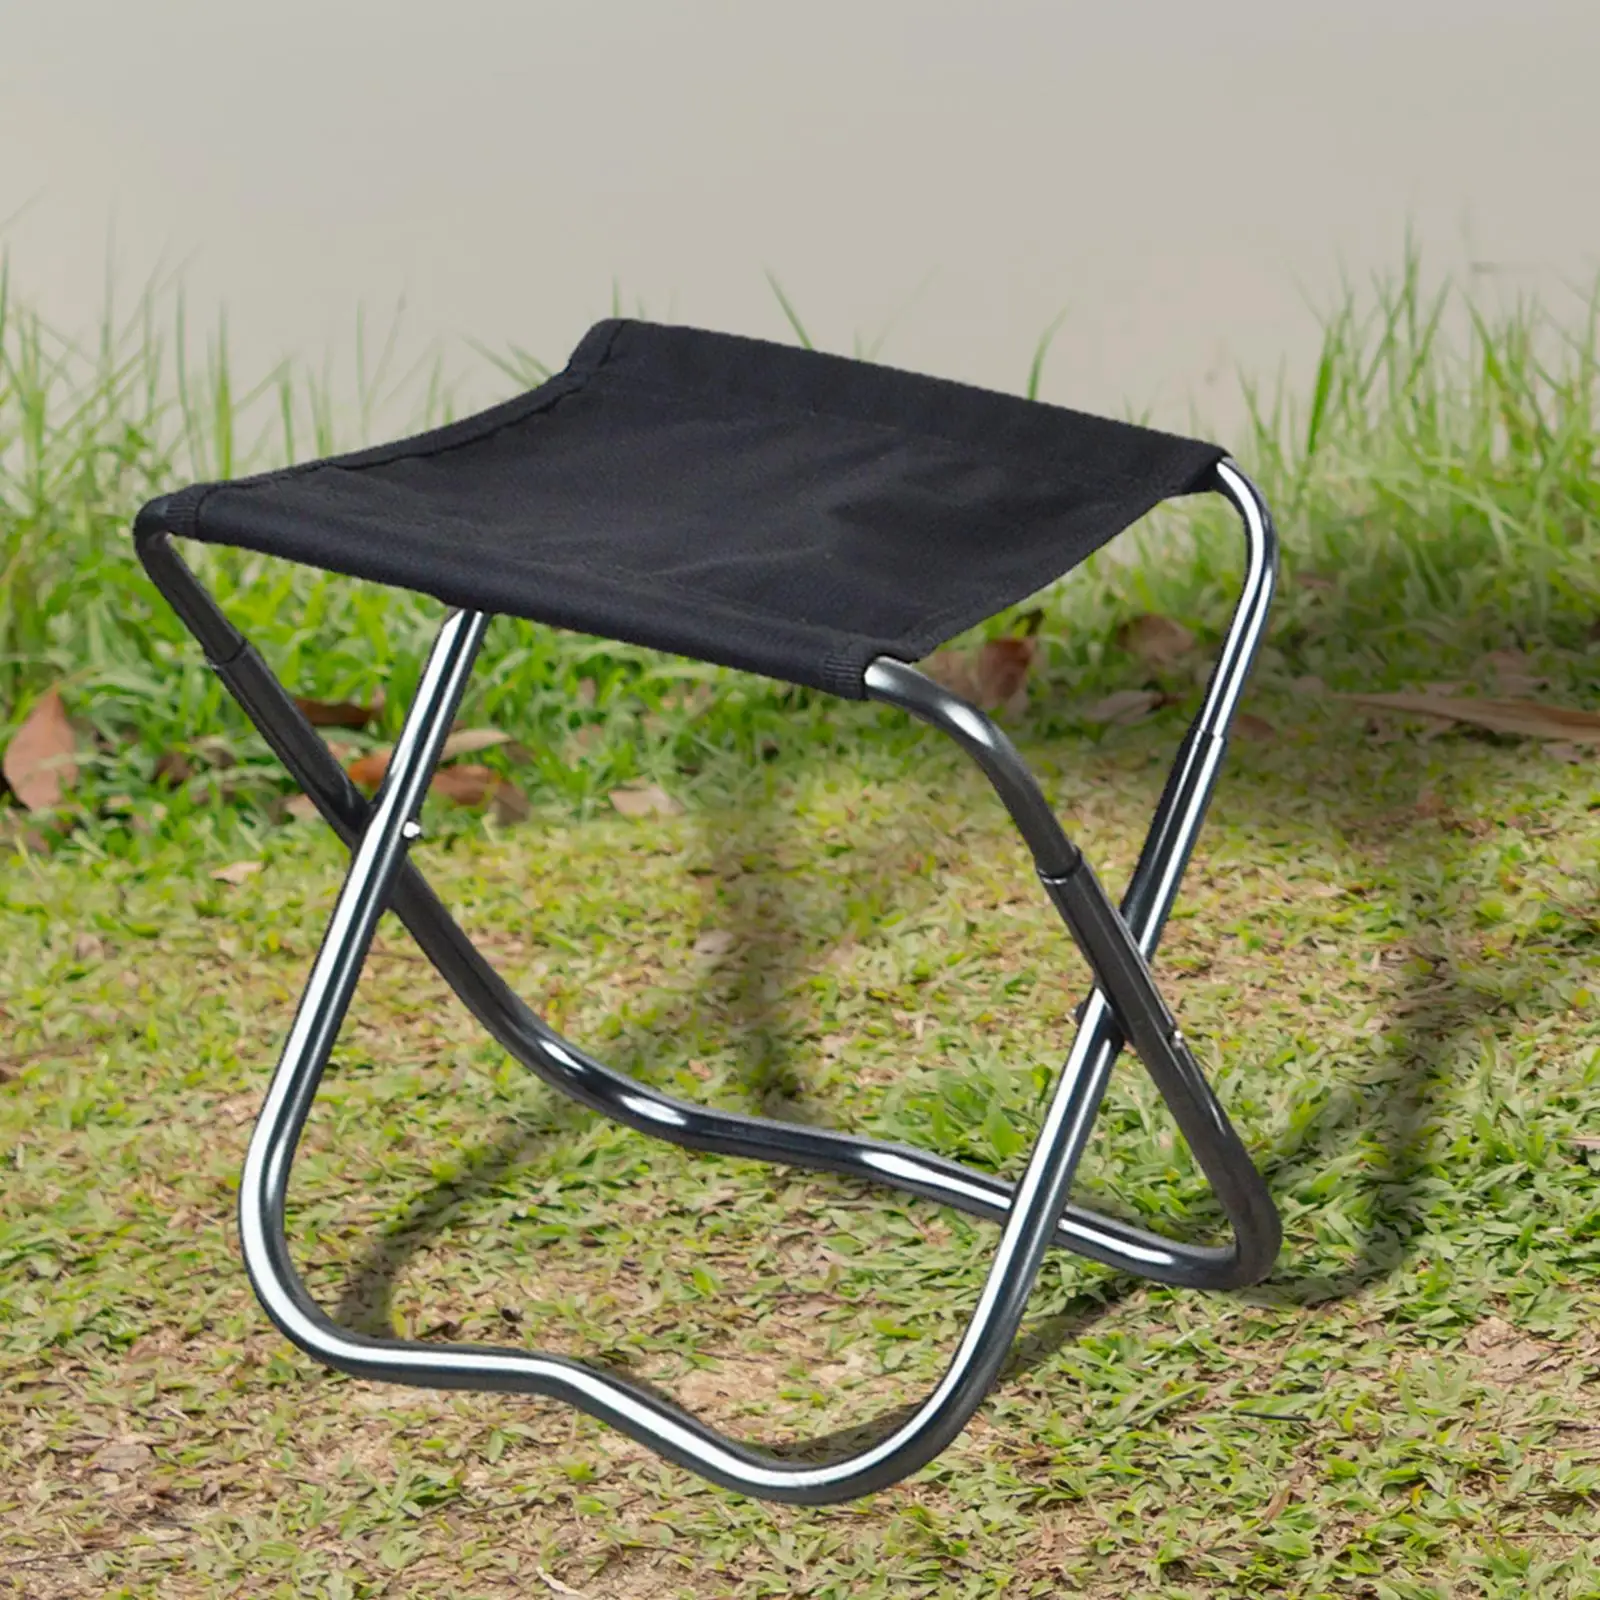 Camping Chair Comfortable Portable Folding Stool Outdoor Wear Resistant Camping Stool for Picnic Garden Hiking Fishing Camping